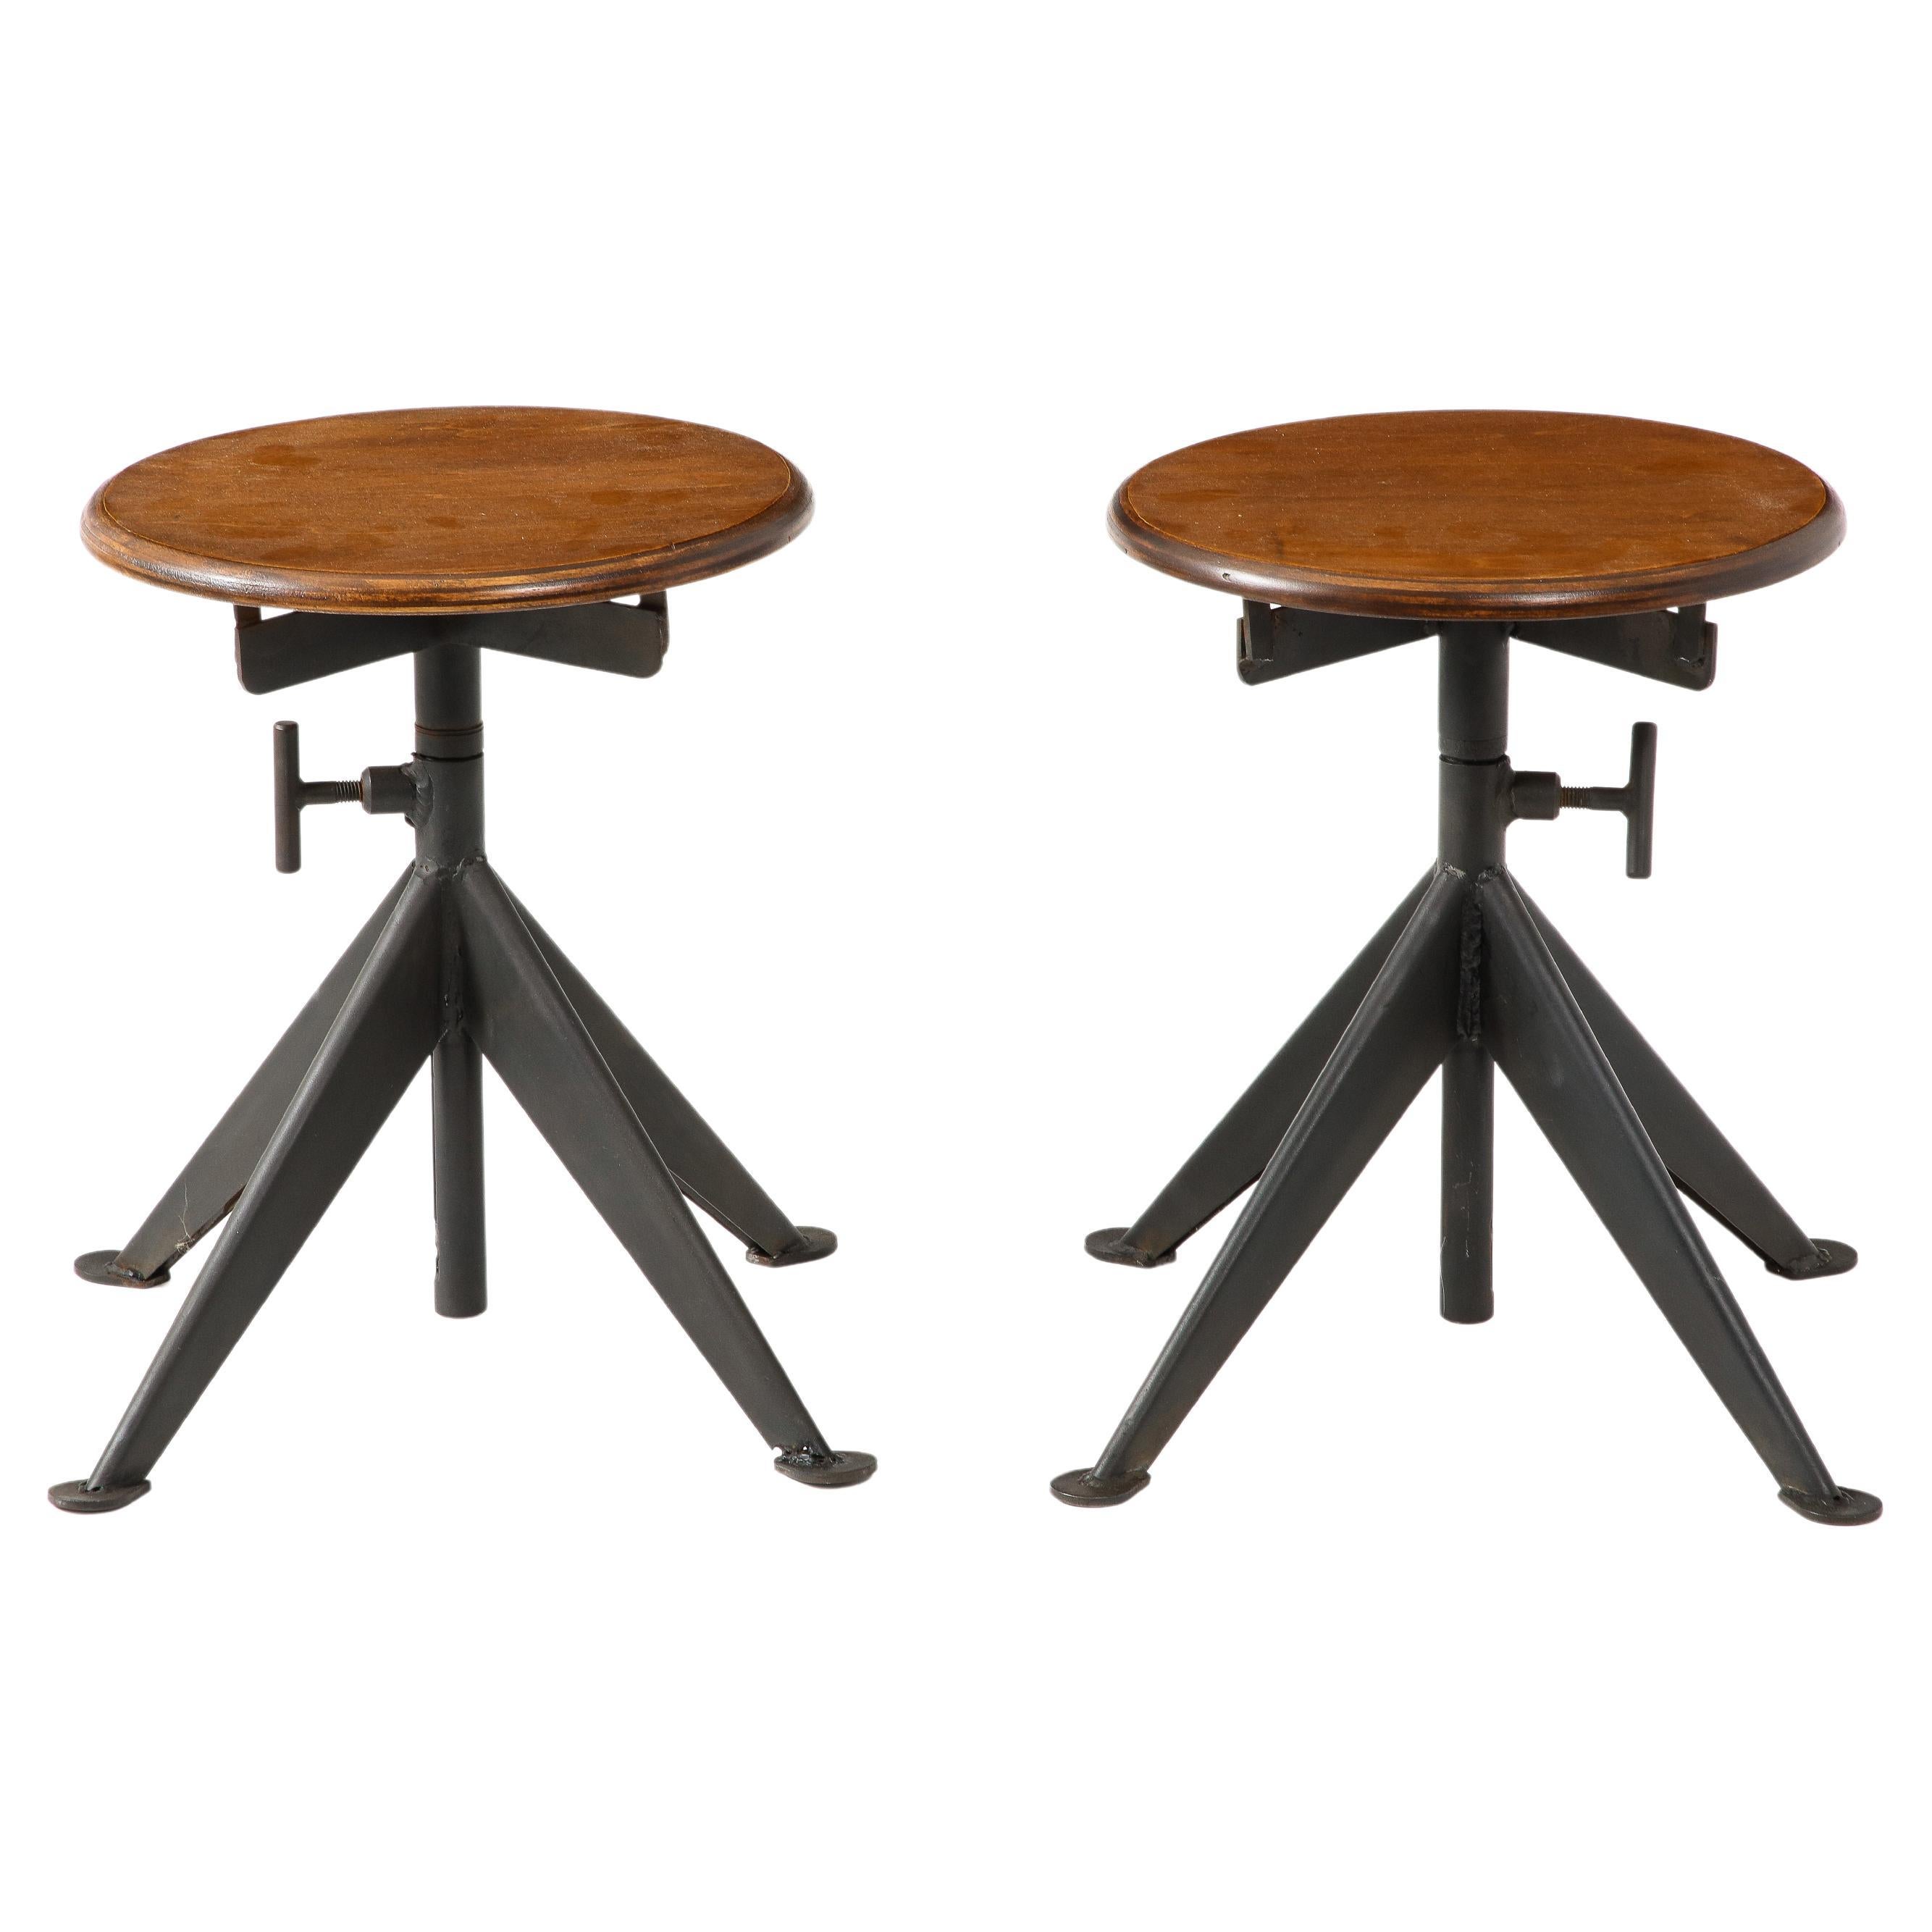 Pair of Industrial Steel & Ply Swedish Stools, Sweden 1950's For Sale